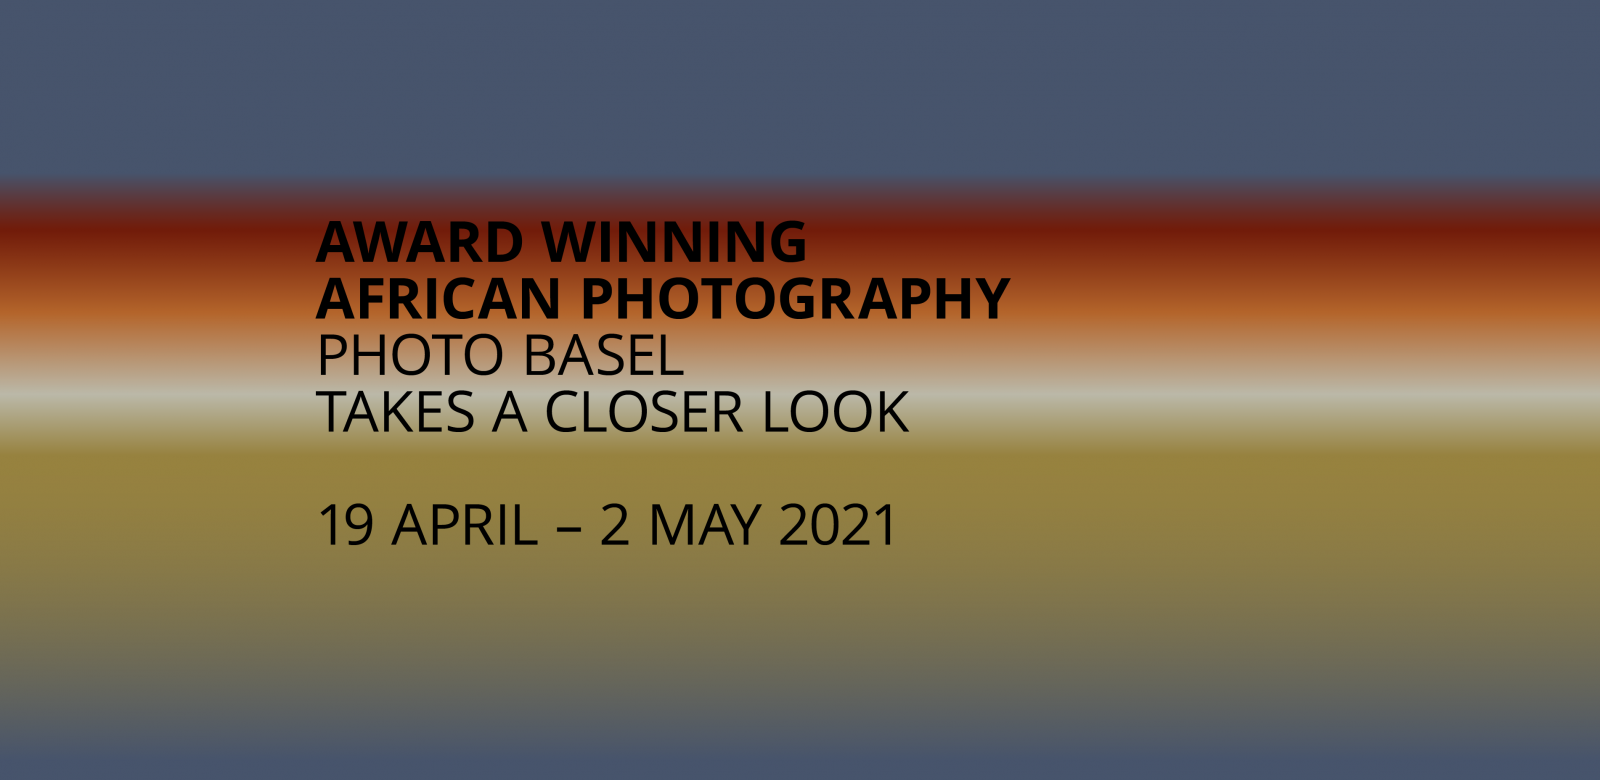 Award Winning African Photography - photo basel Takes a Closer Look